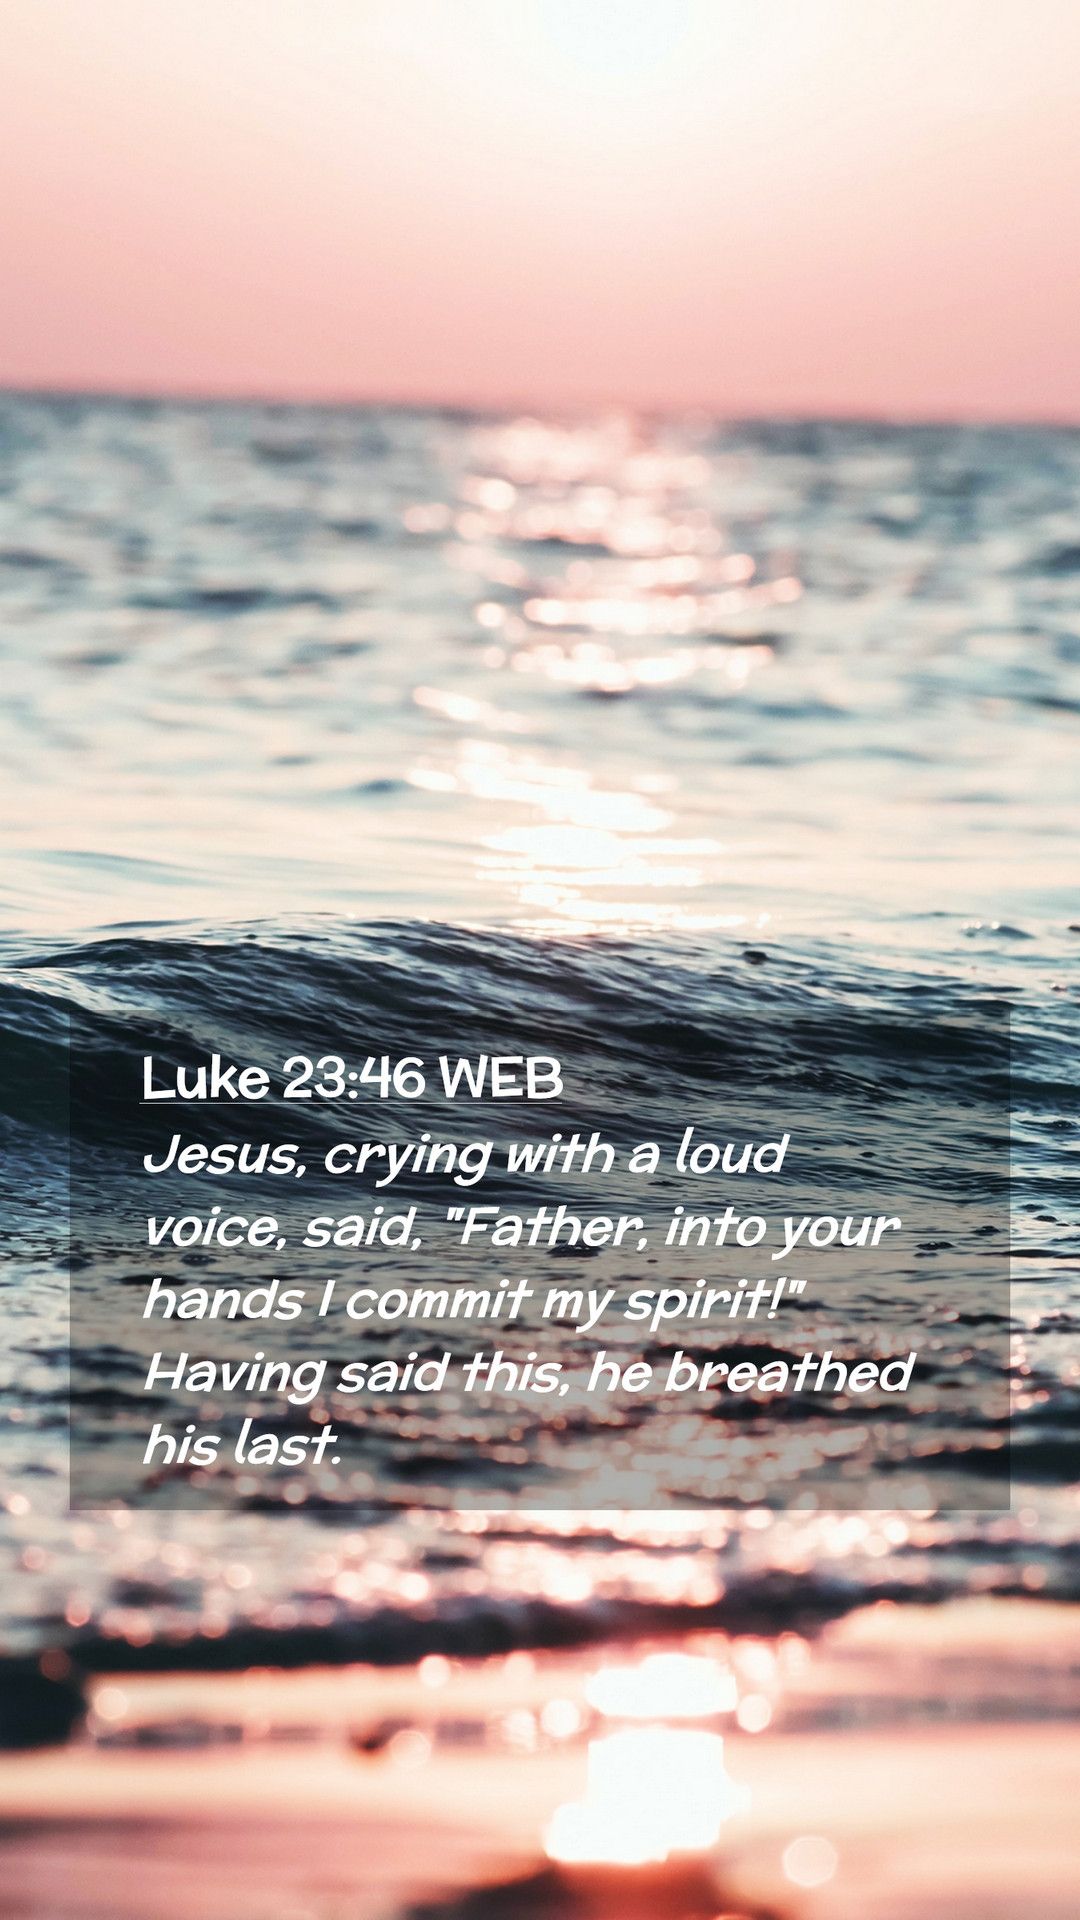 Luke 23:46 WEB Mobile Phone Wallpaper, crying with a loud voice, said, Father